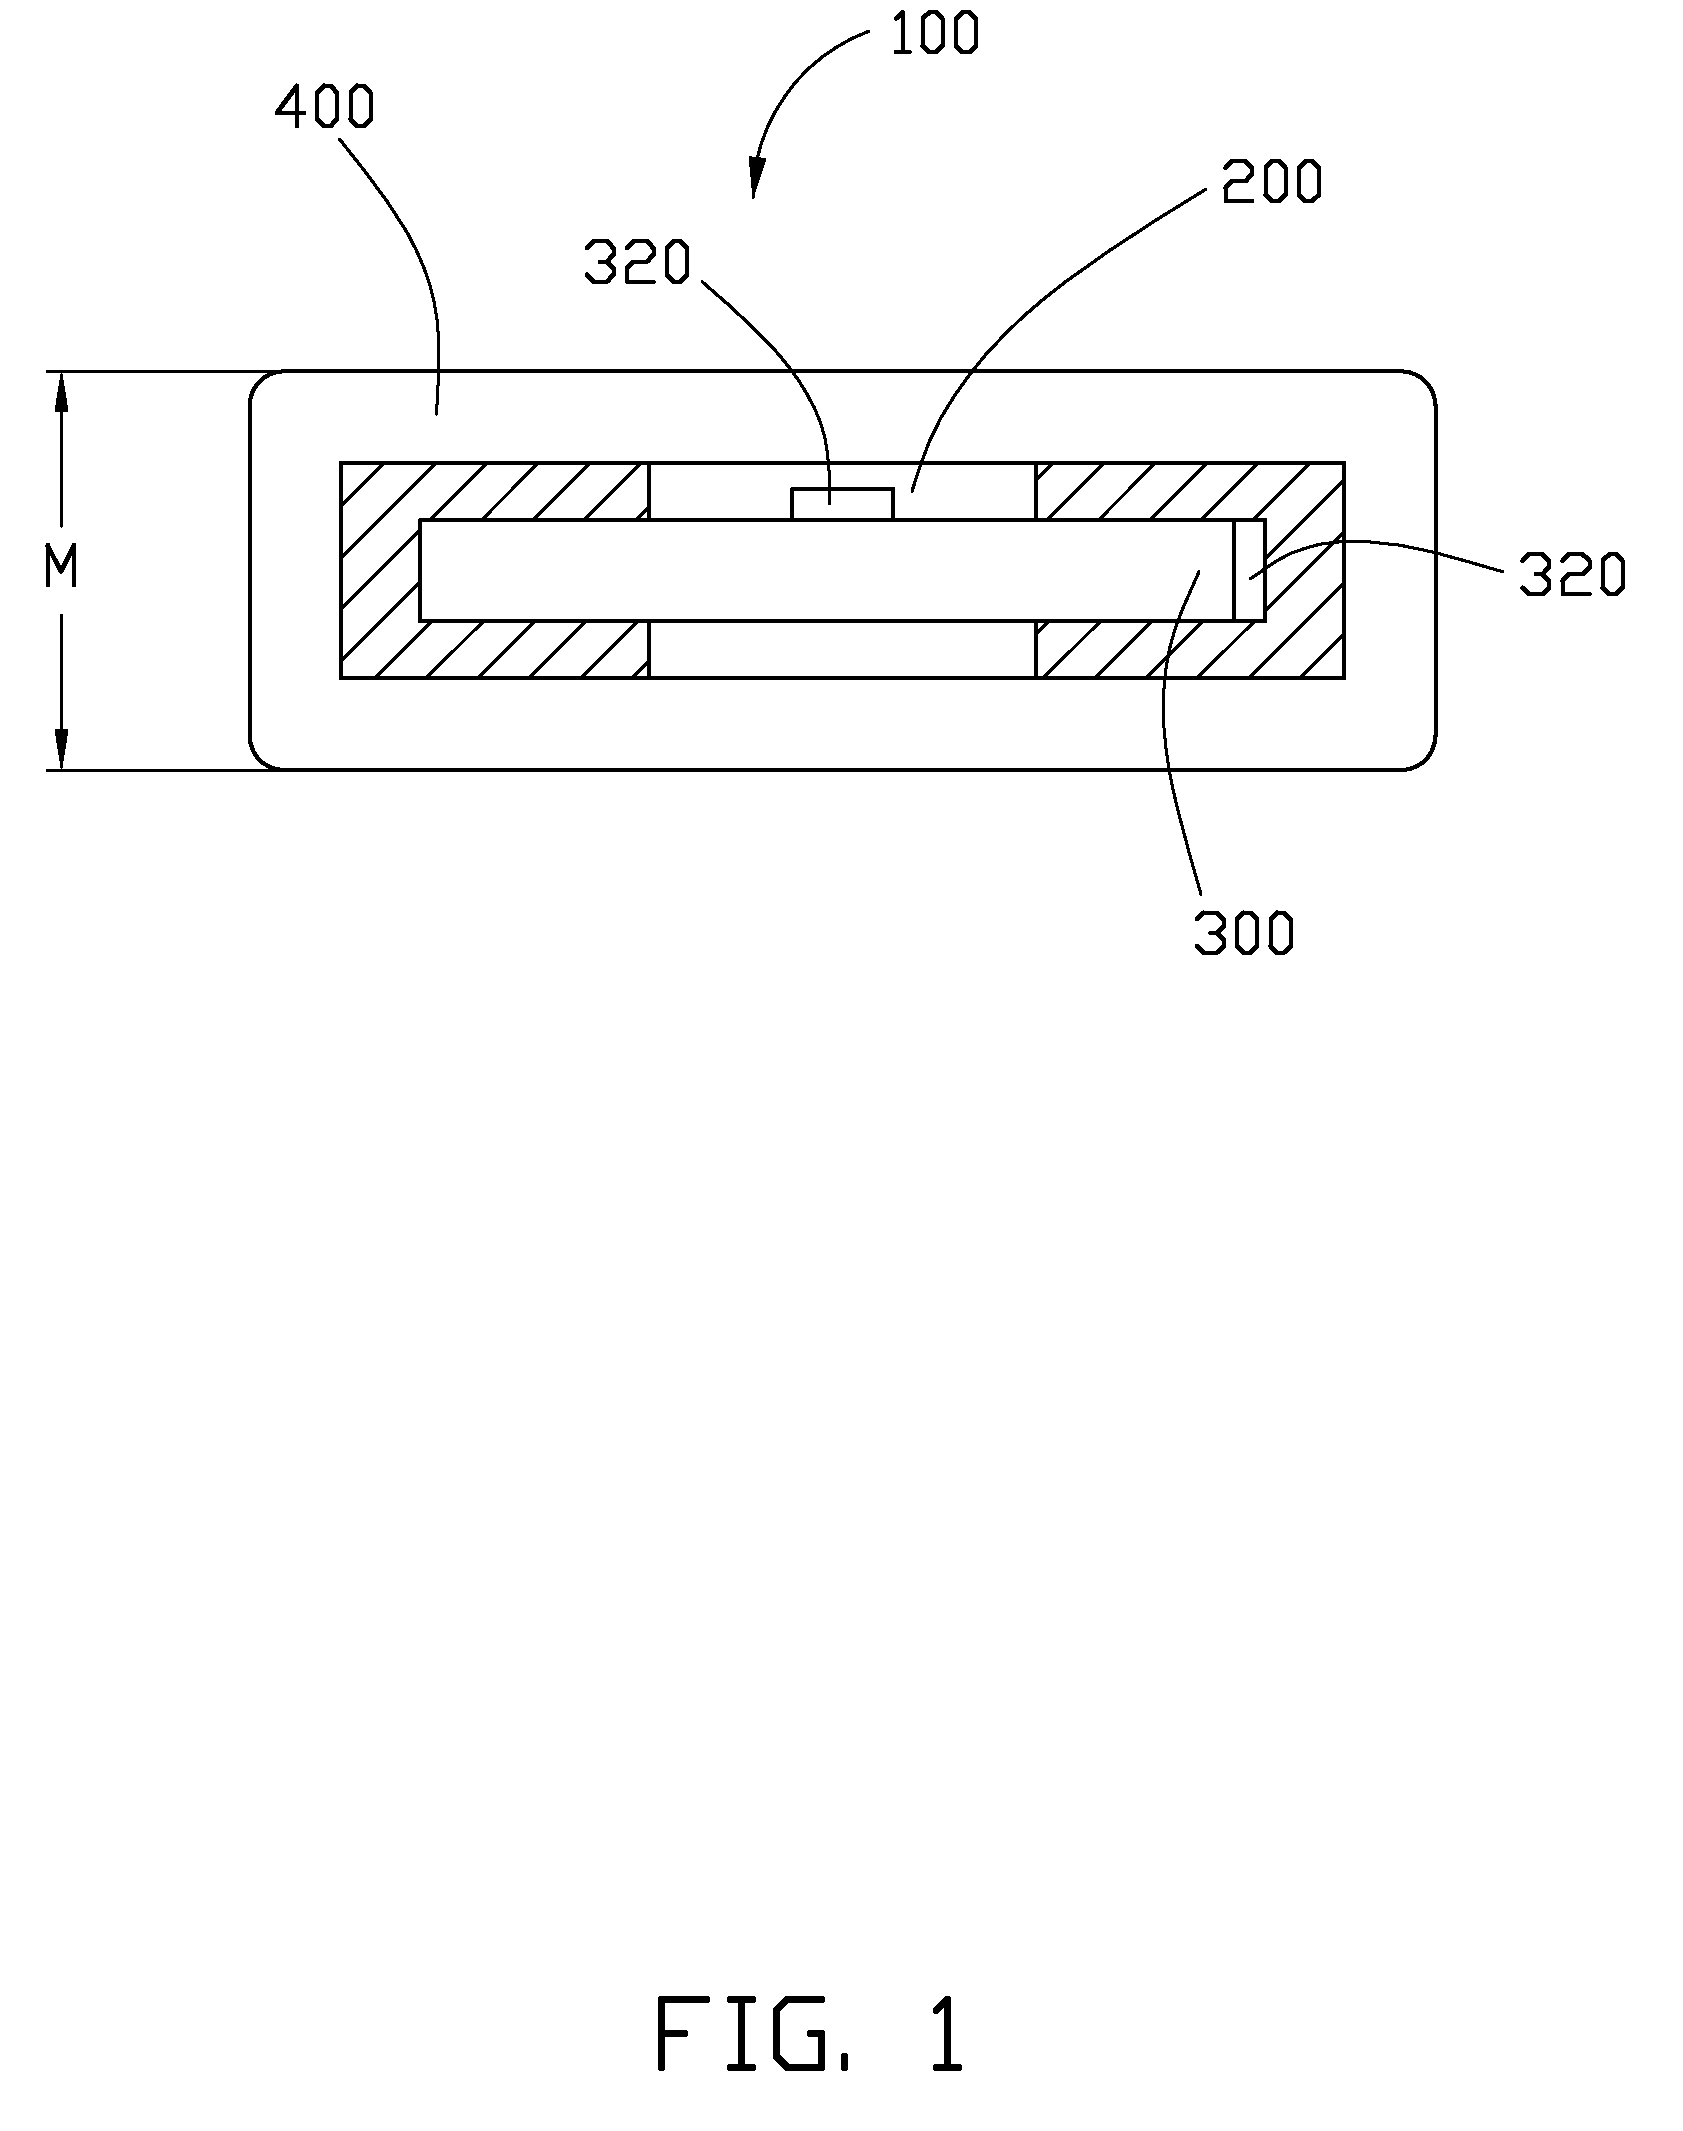 Inductor and inductor coil